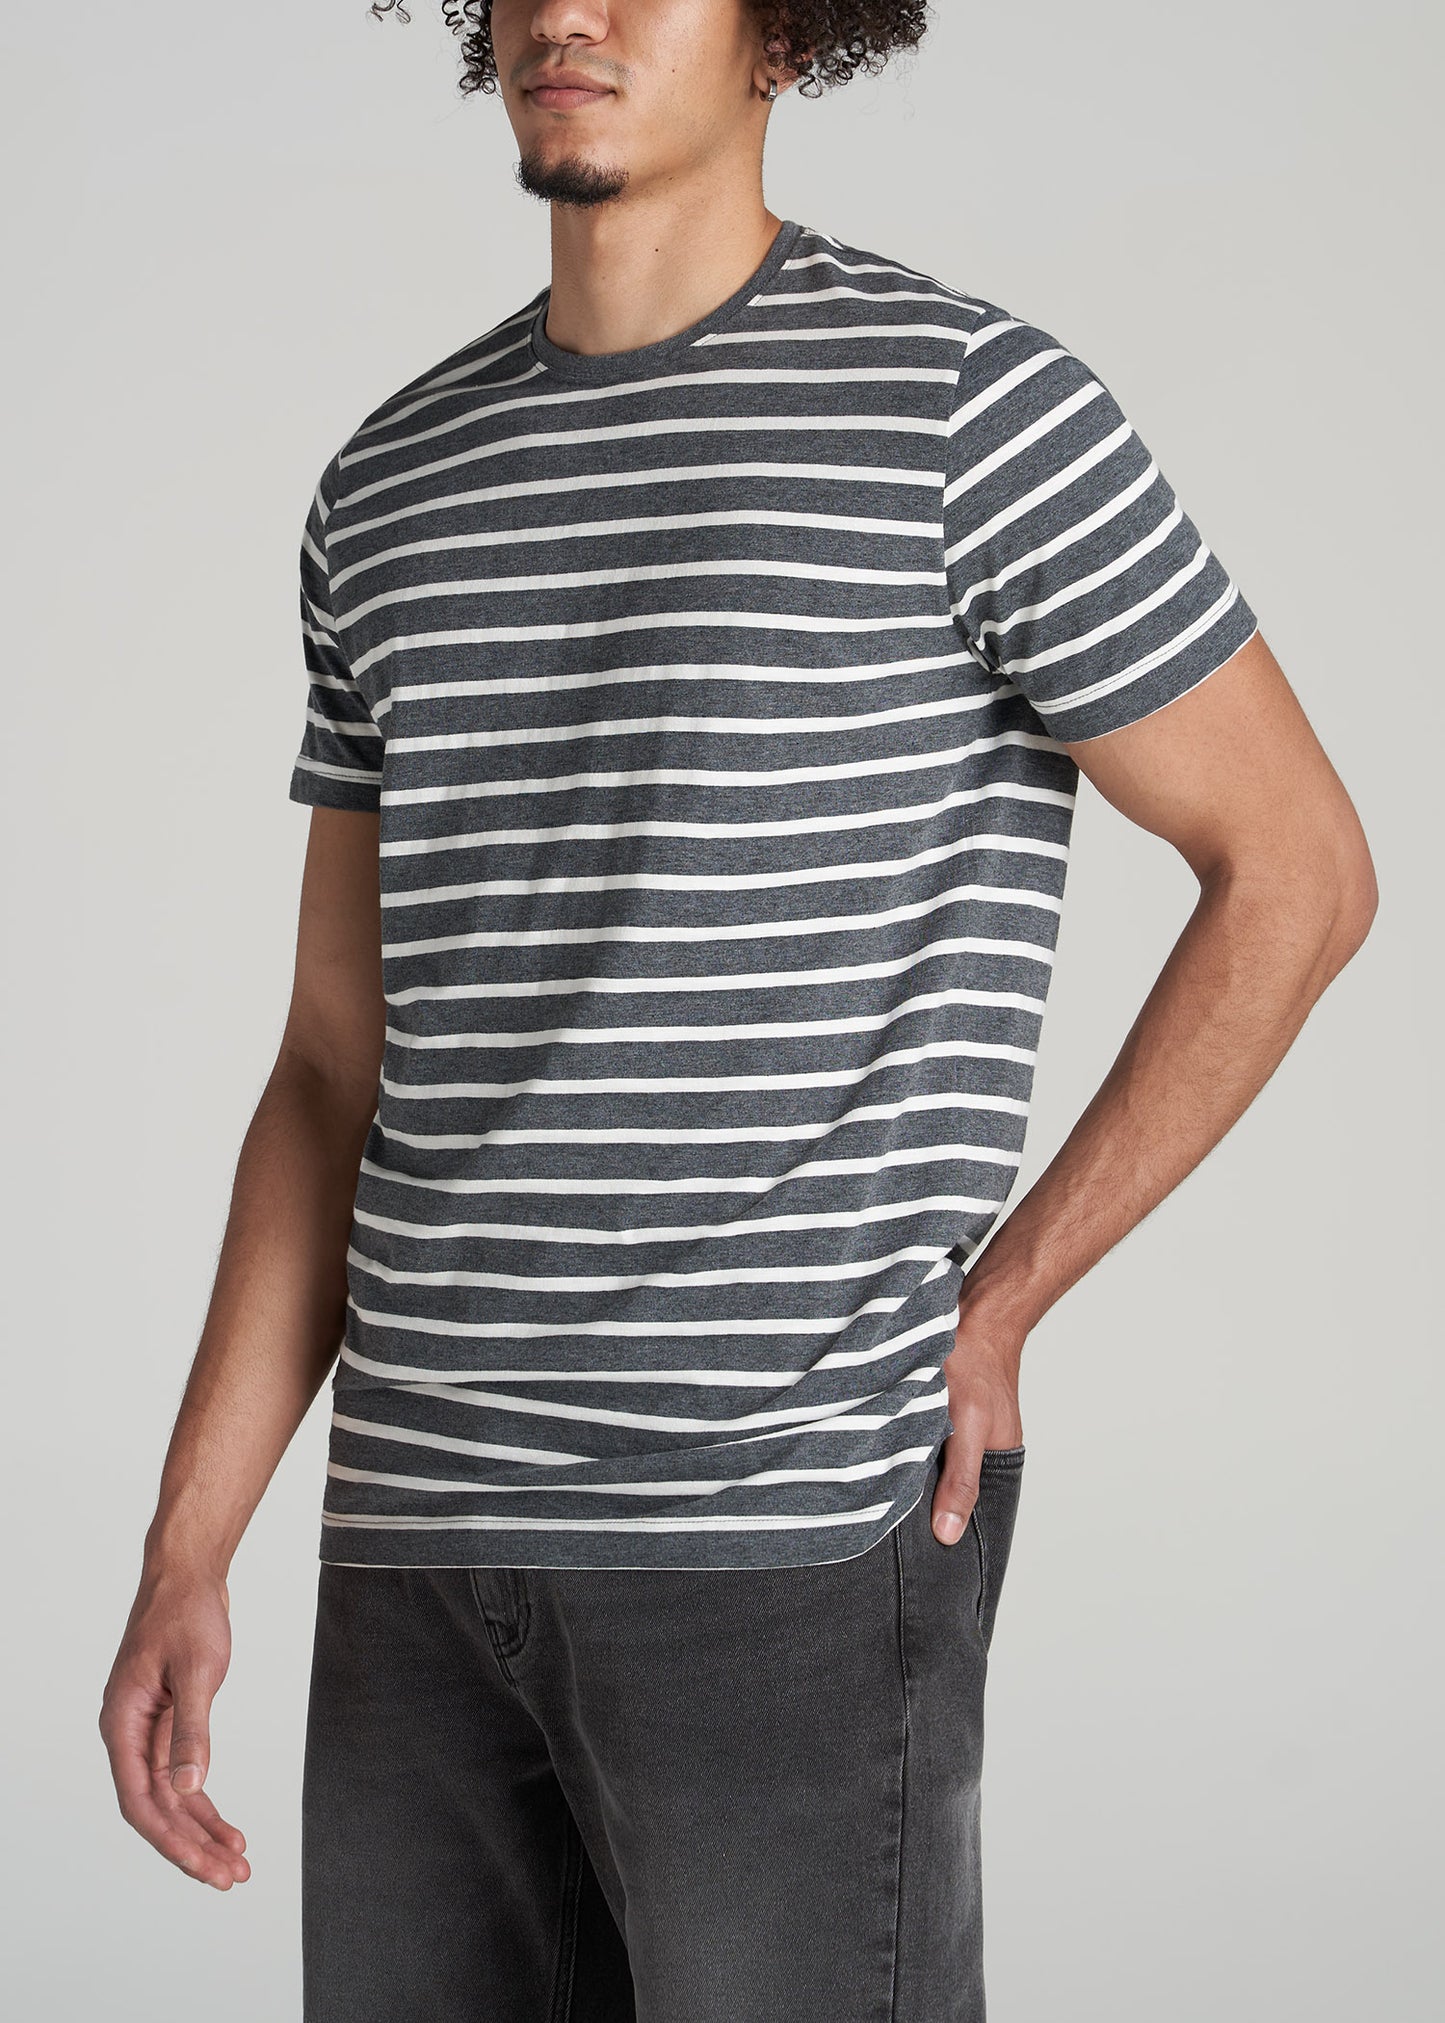 American Tall Regular-Fit Striped Tee in Navy and White - Men's Tall T-Shirt M / Tall / Navy and White Stripe